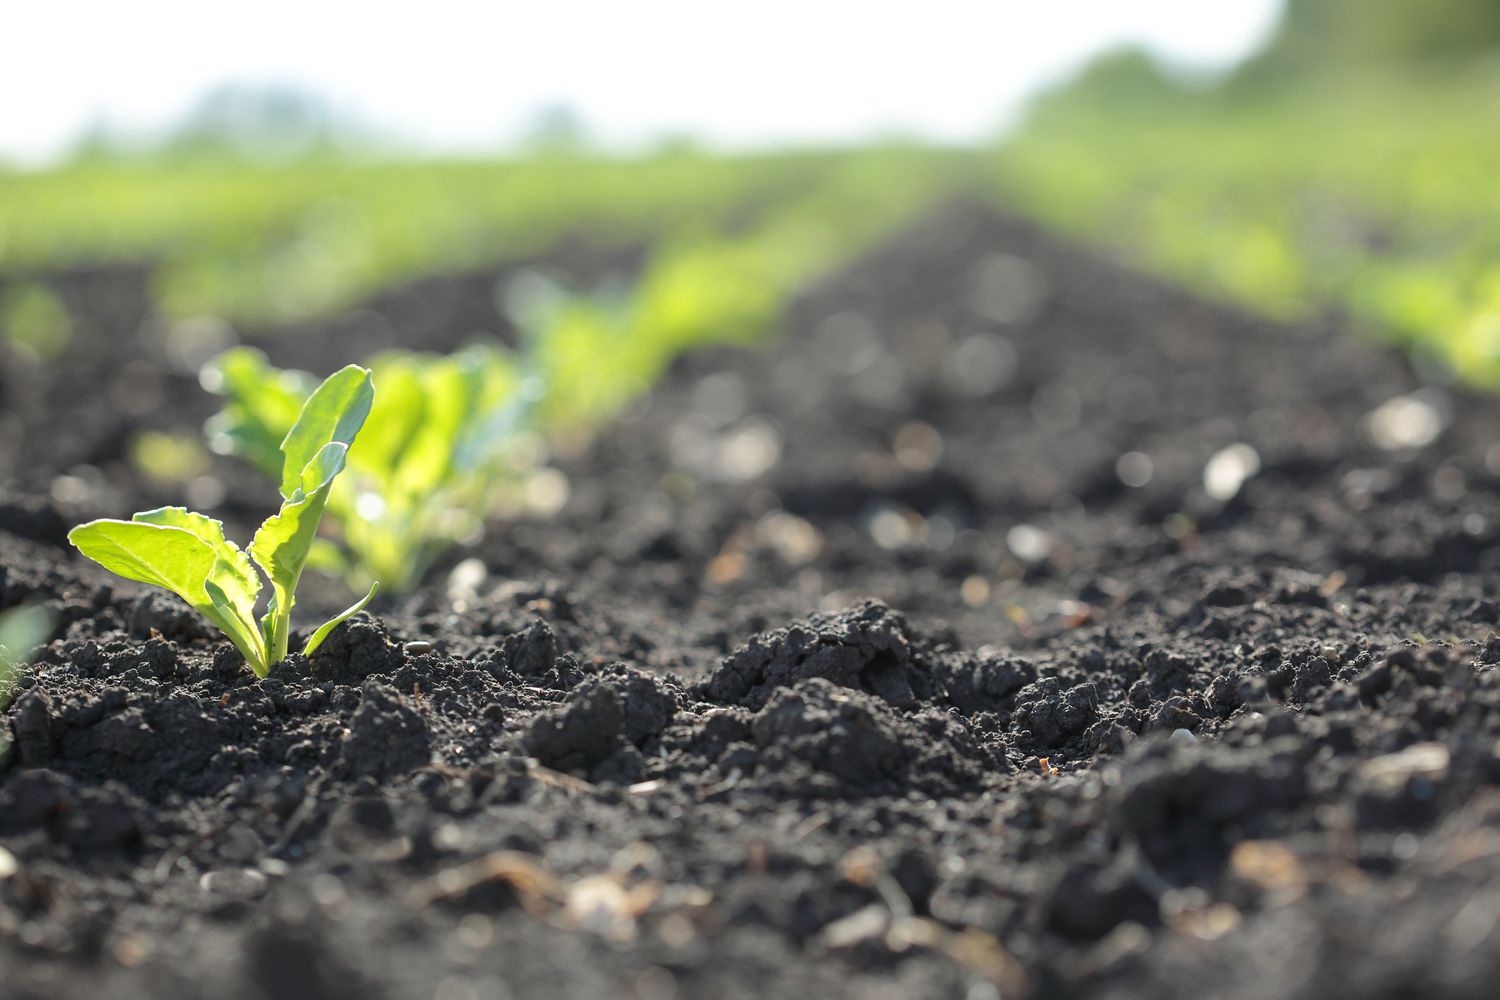 How Does Crop Rotation Help Preserve Soil?